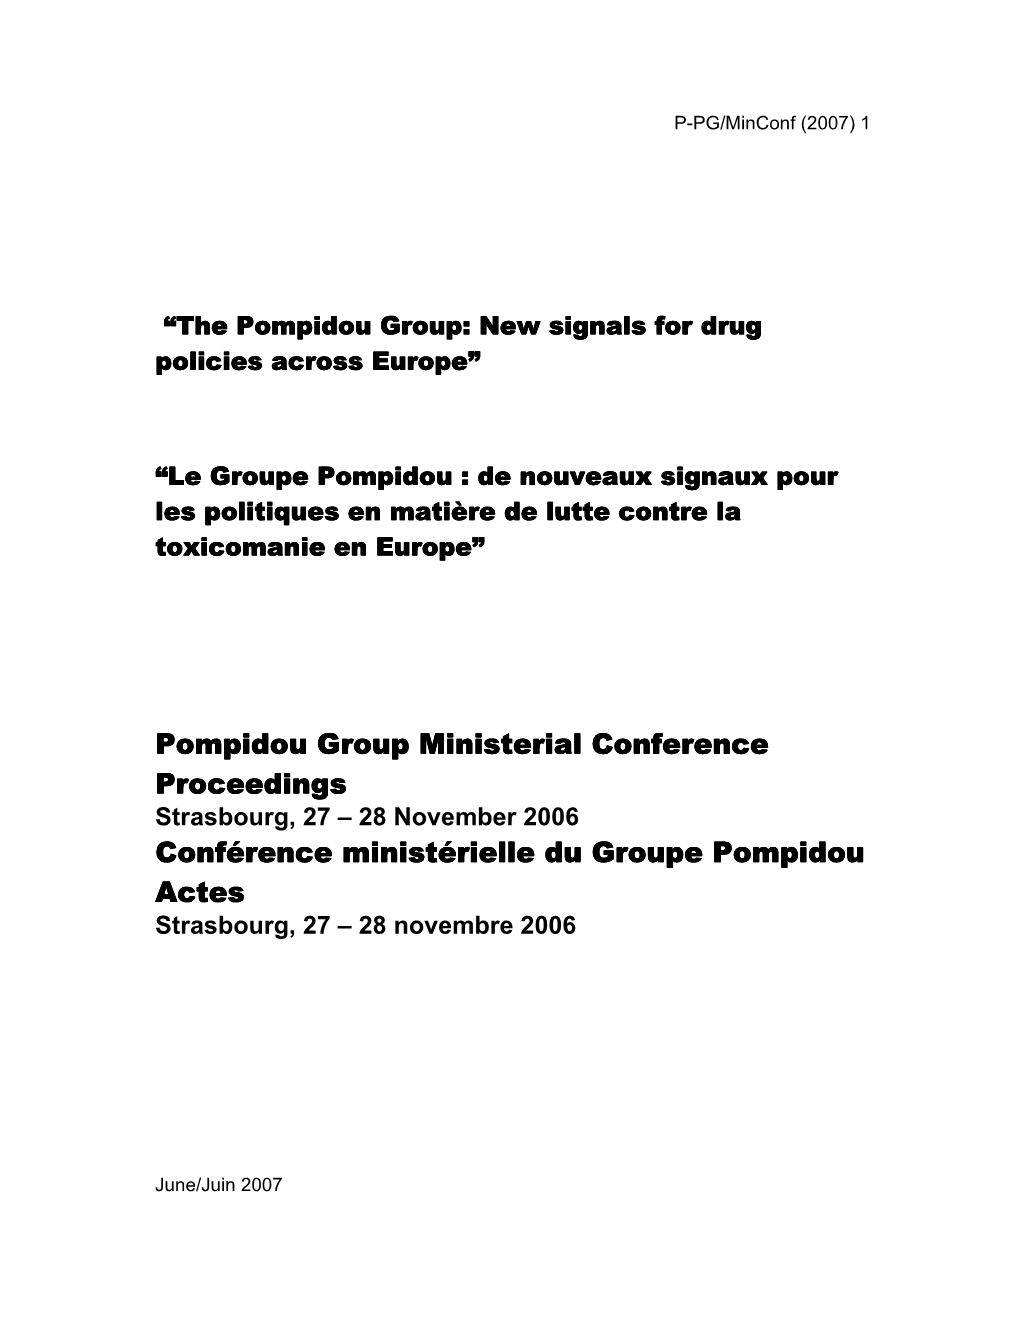 Pompidou Group Ministerial Conference Proceedings